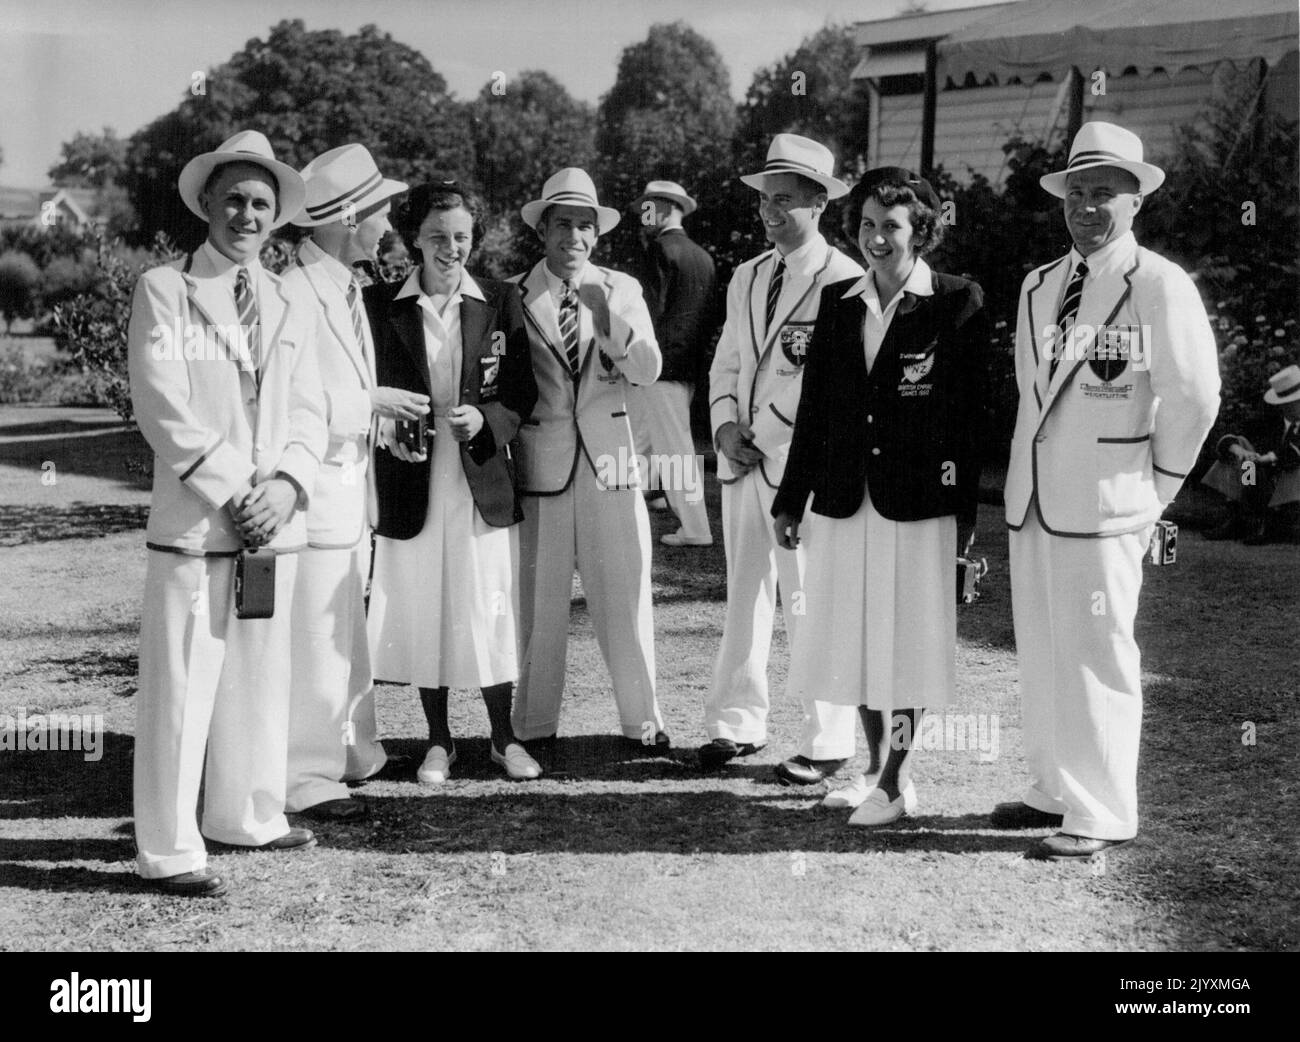 Empire Games Garden Party at Auck Empire Games Garden Party at Auckland, New Zealand. Rhodesian Atheletes with New Zealand women swimmers at the vice-Regal garden party at Government house, Auckland, on February 2, From left are K. Bennett, I. S. Johnson, Miss N. Bridson, A. Vercueil, J. Small, Miss A. Mackenzie, A. Oxden-Willows. February 07, 1950. Stock Photo